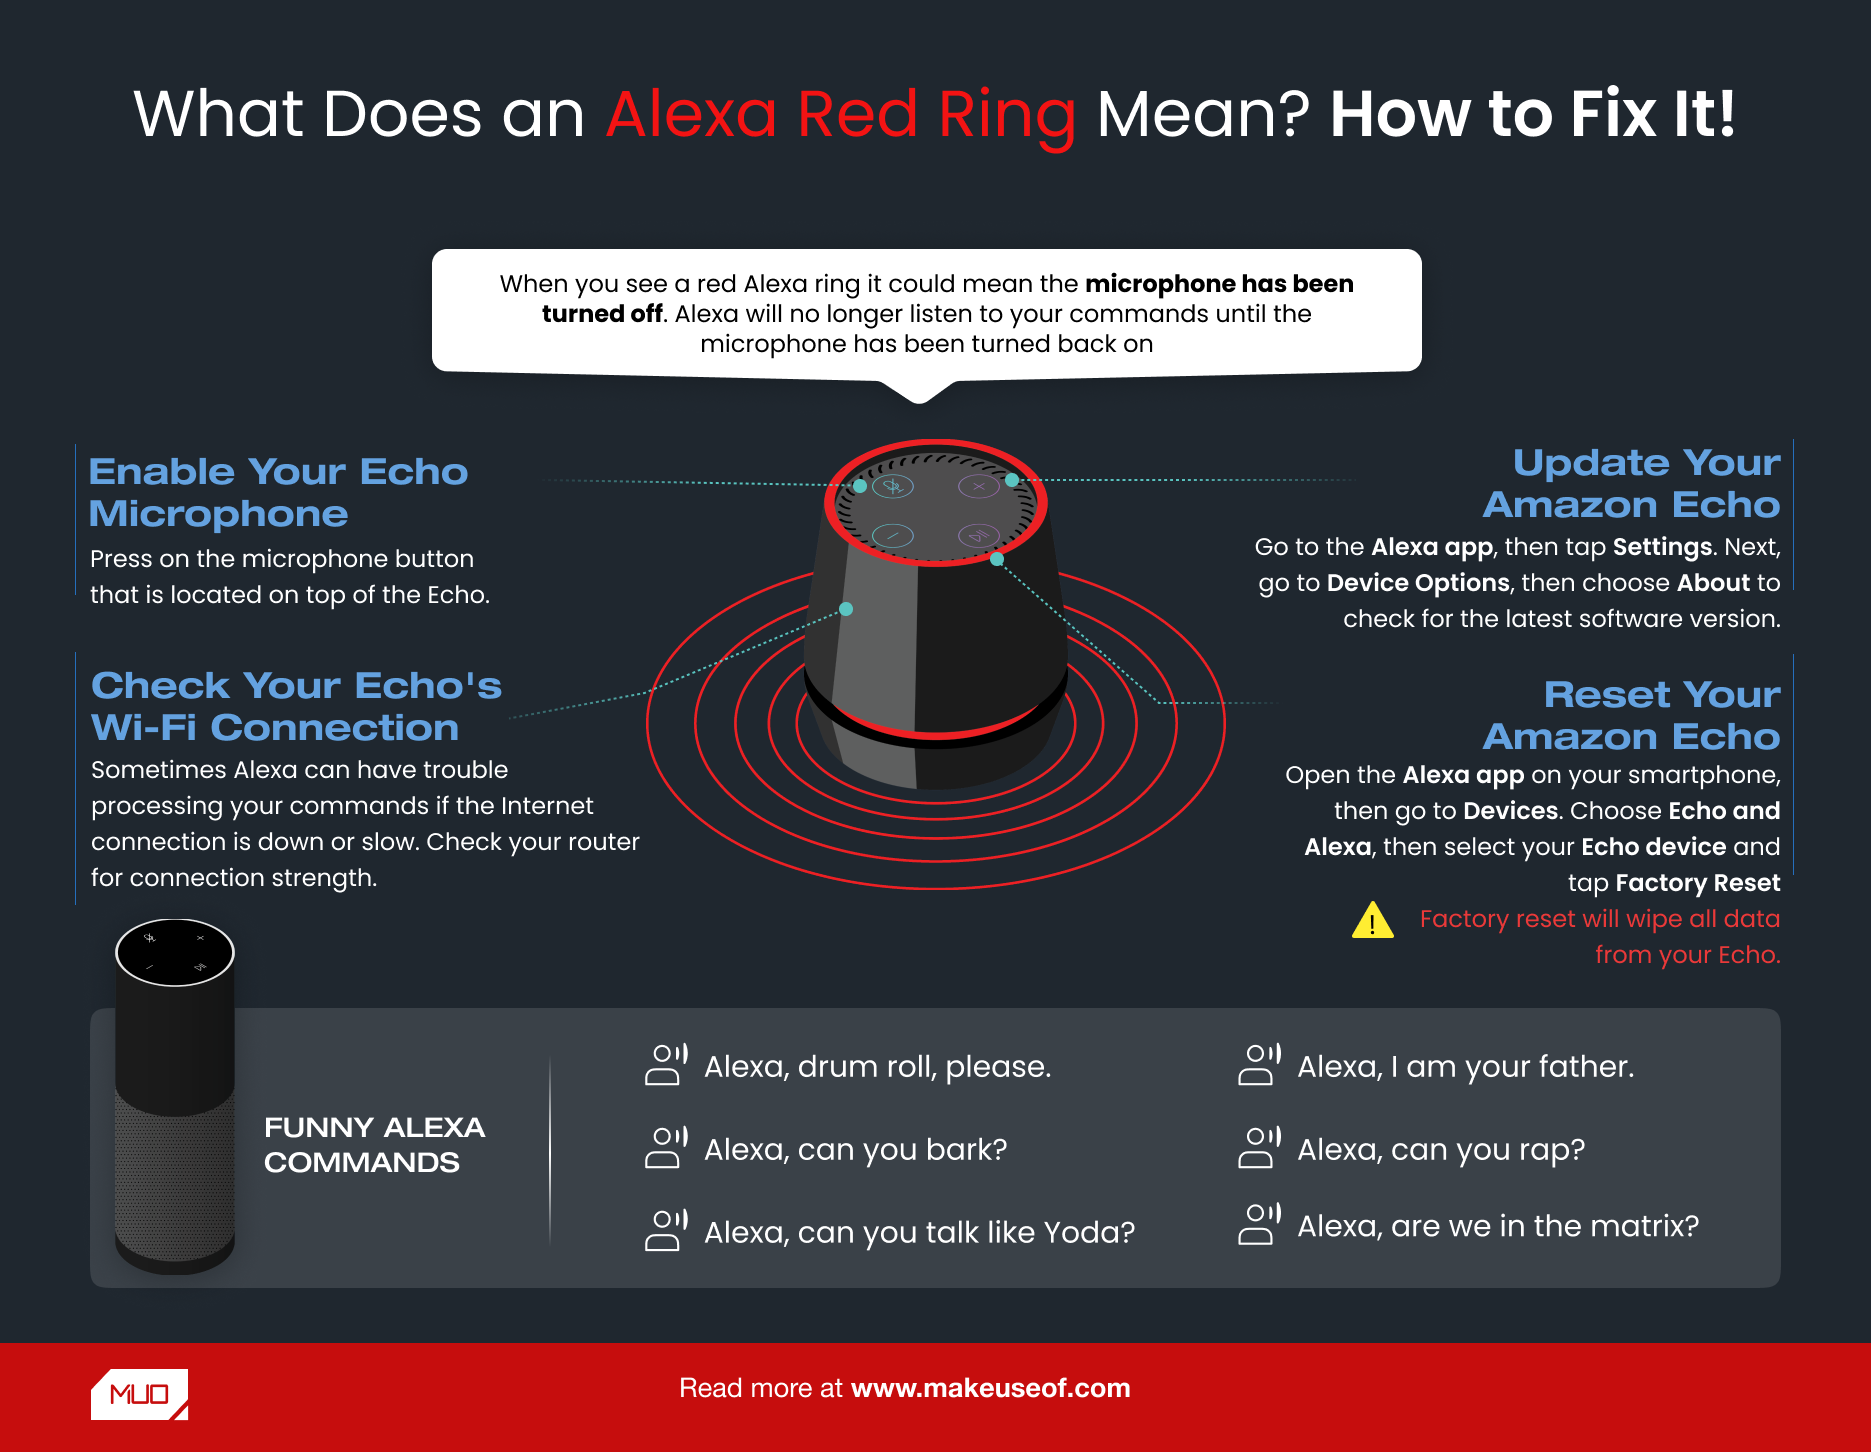 Infographic on What an Alexa Red Ring Means and How to Fix It